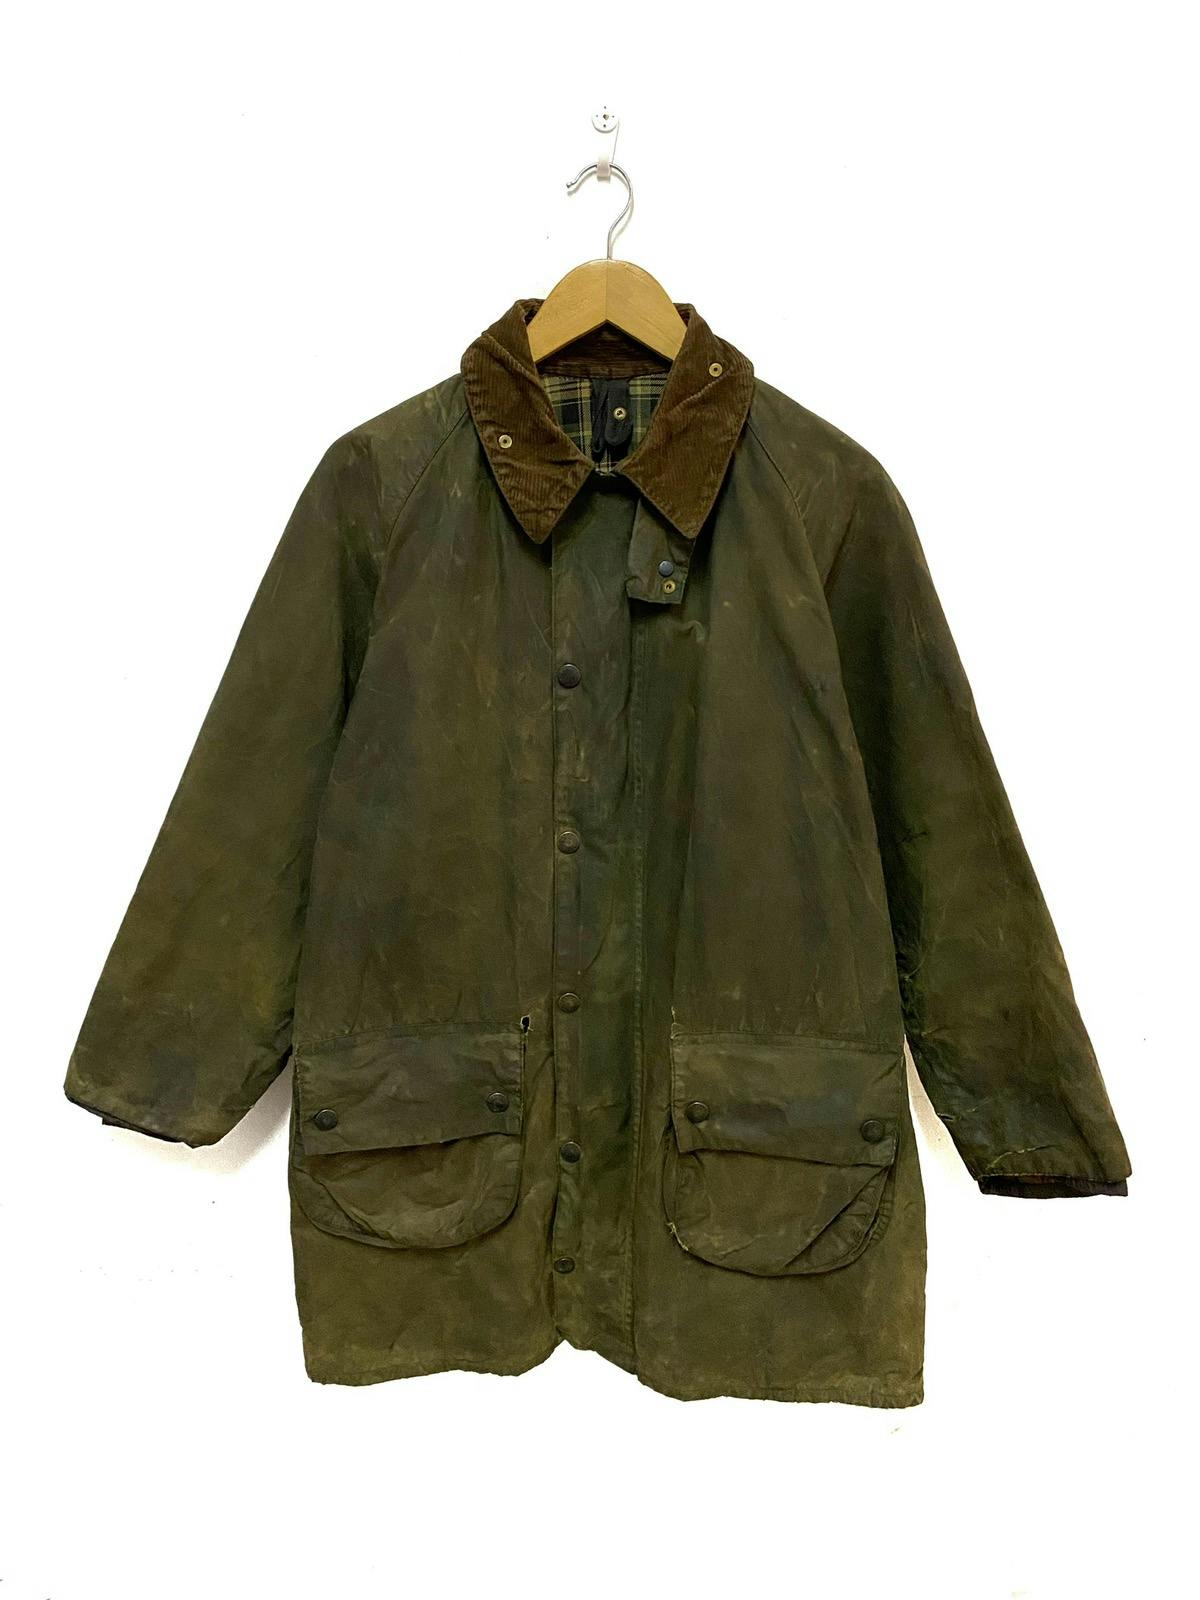 Barbour Gamefair Waxed Jacket Made in England - 1